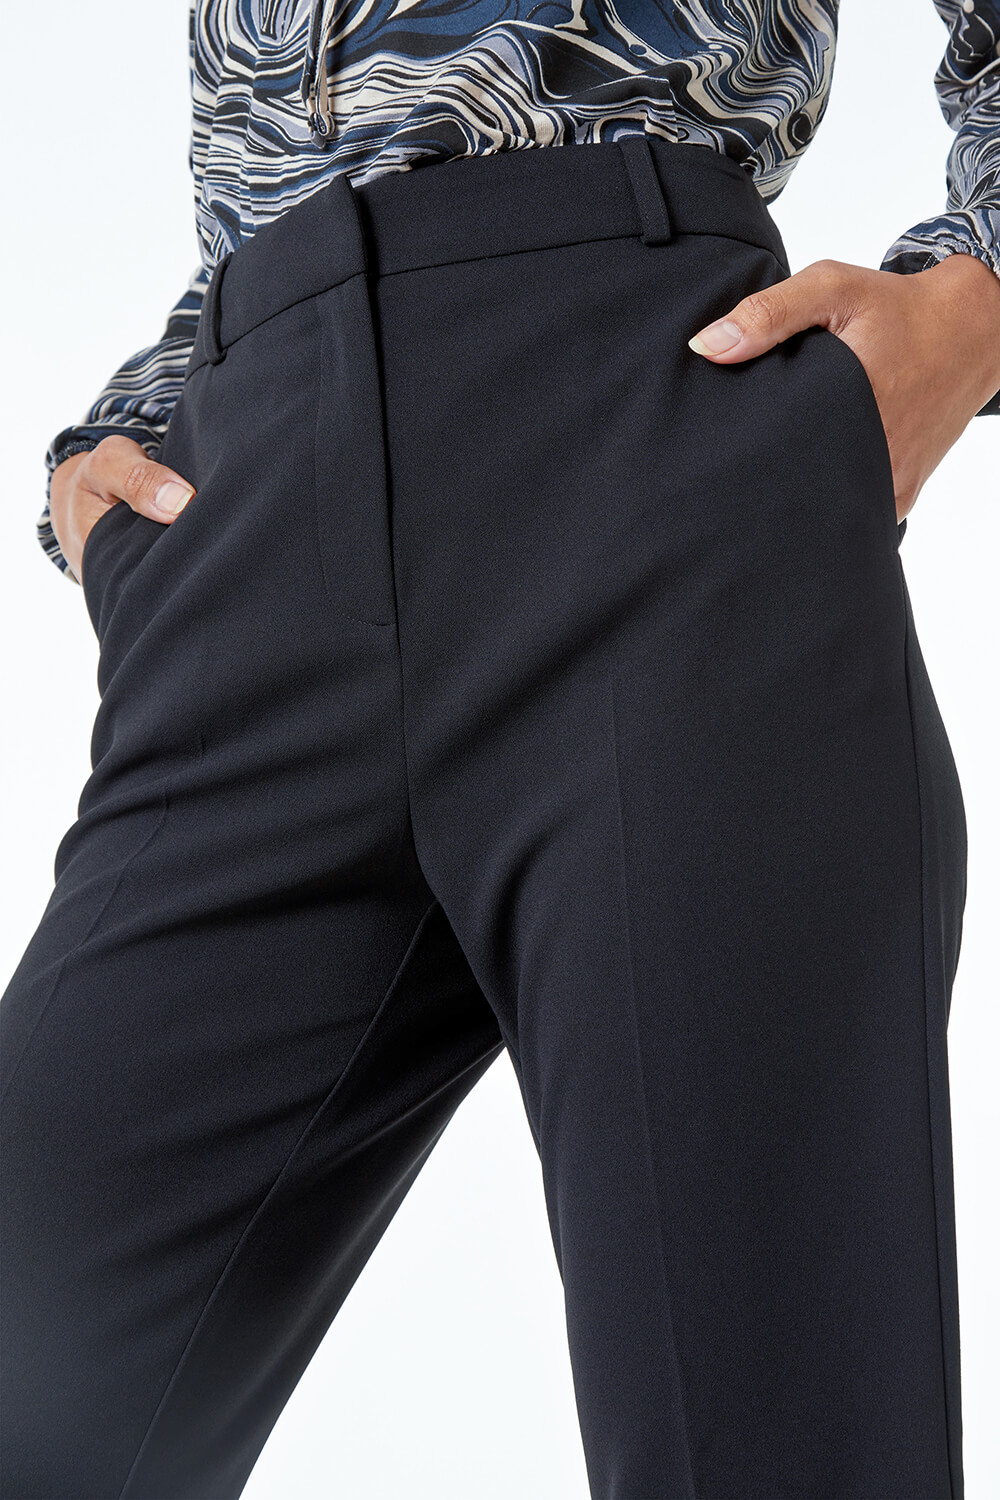 Black Bootcut Leg Stretch Trousers, Image 2 of 5